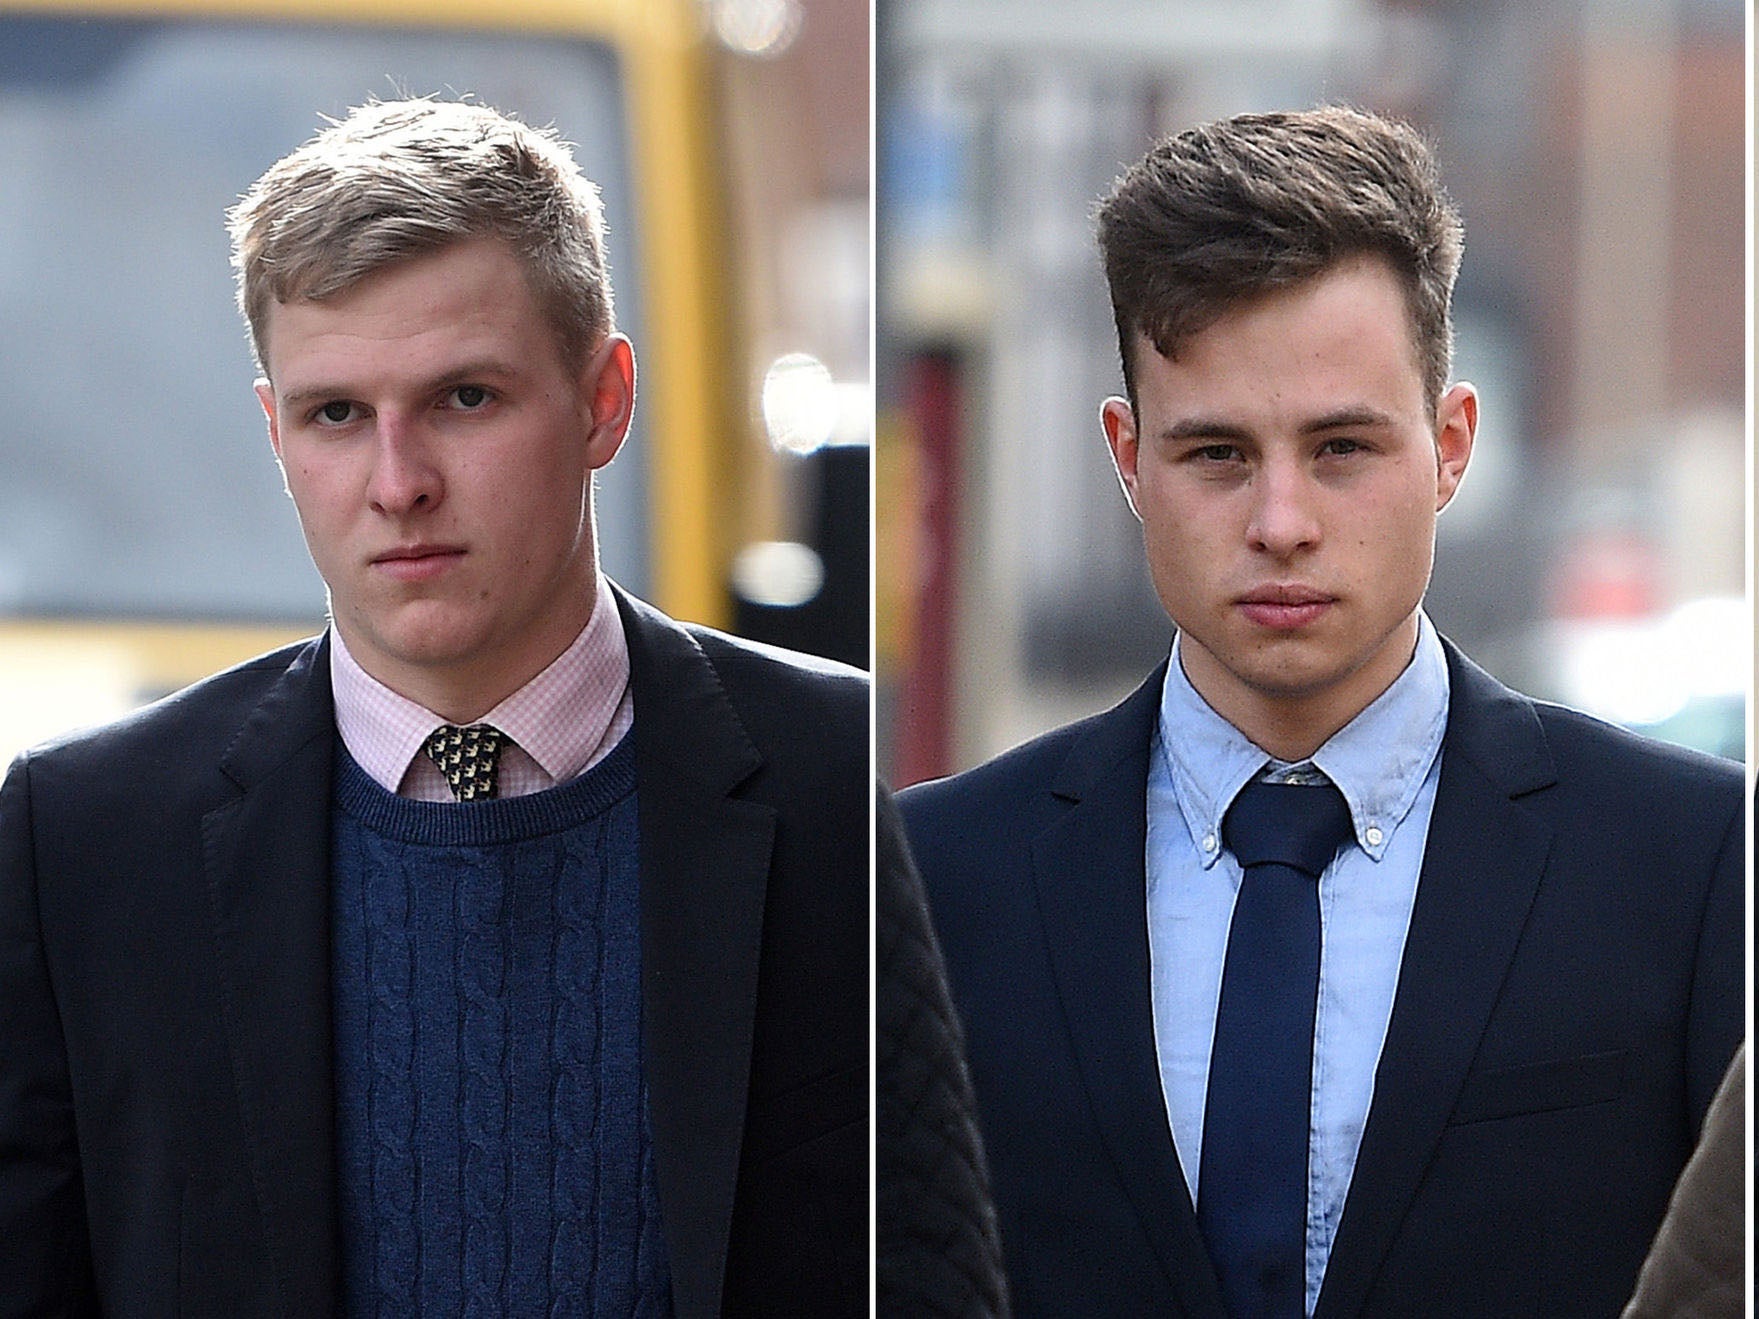 Thady Duff, 22, James Martin, 20 arriving at Gloucester Crown Court earlier this month